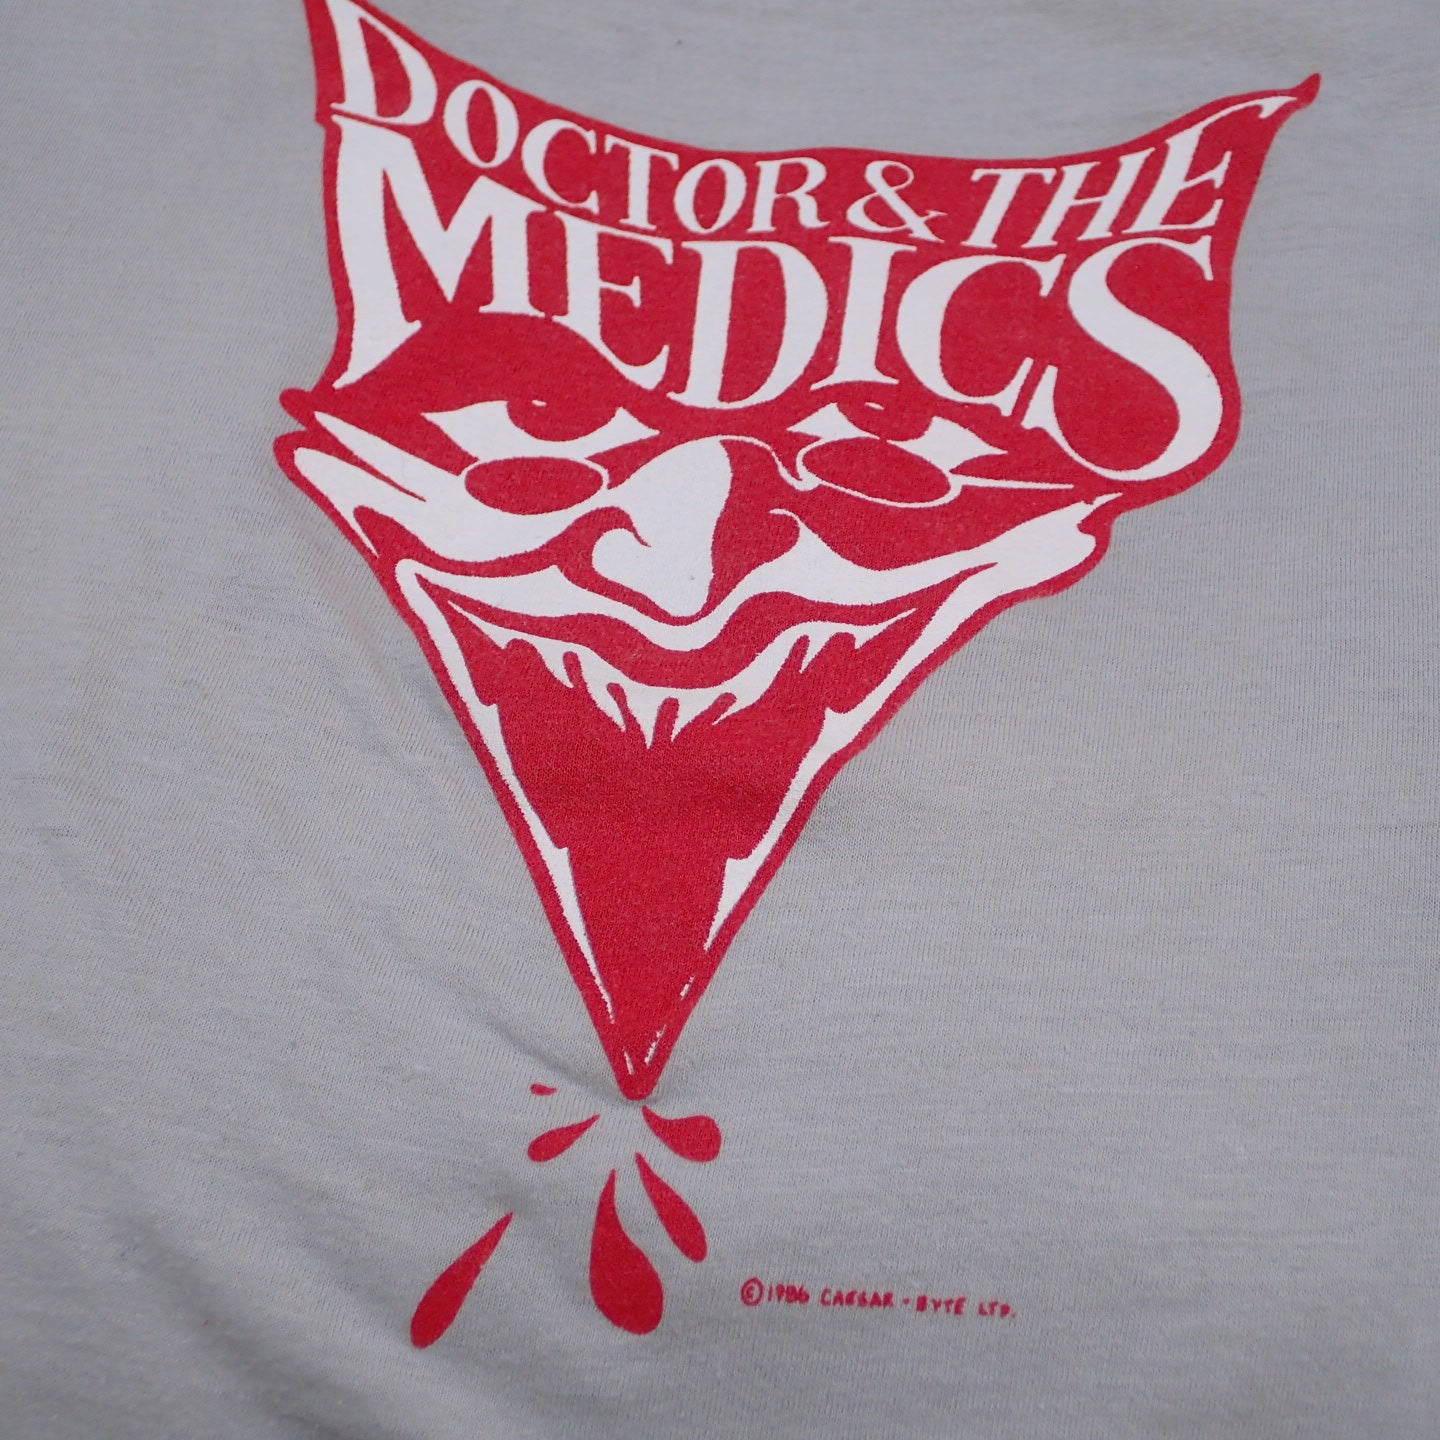 80s Doctor and the Medics T-shirt "Laughing at the Pieces Tee"